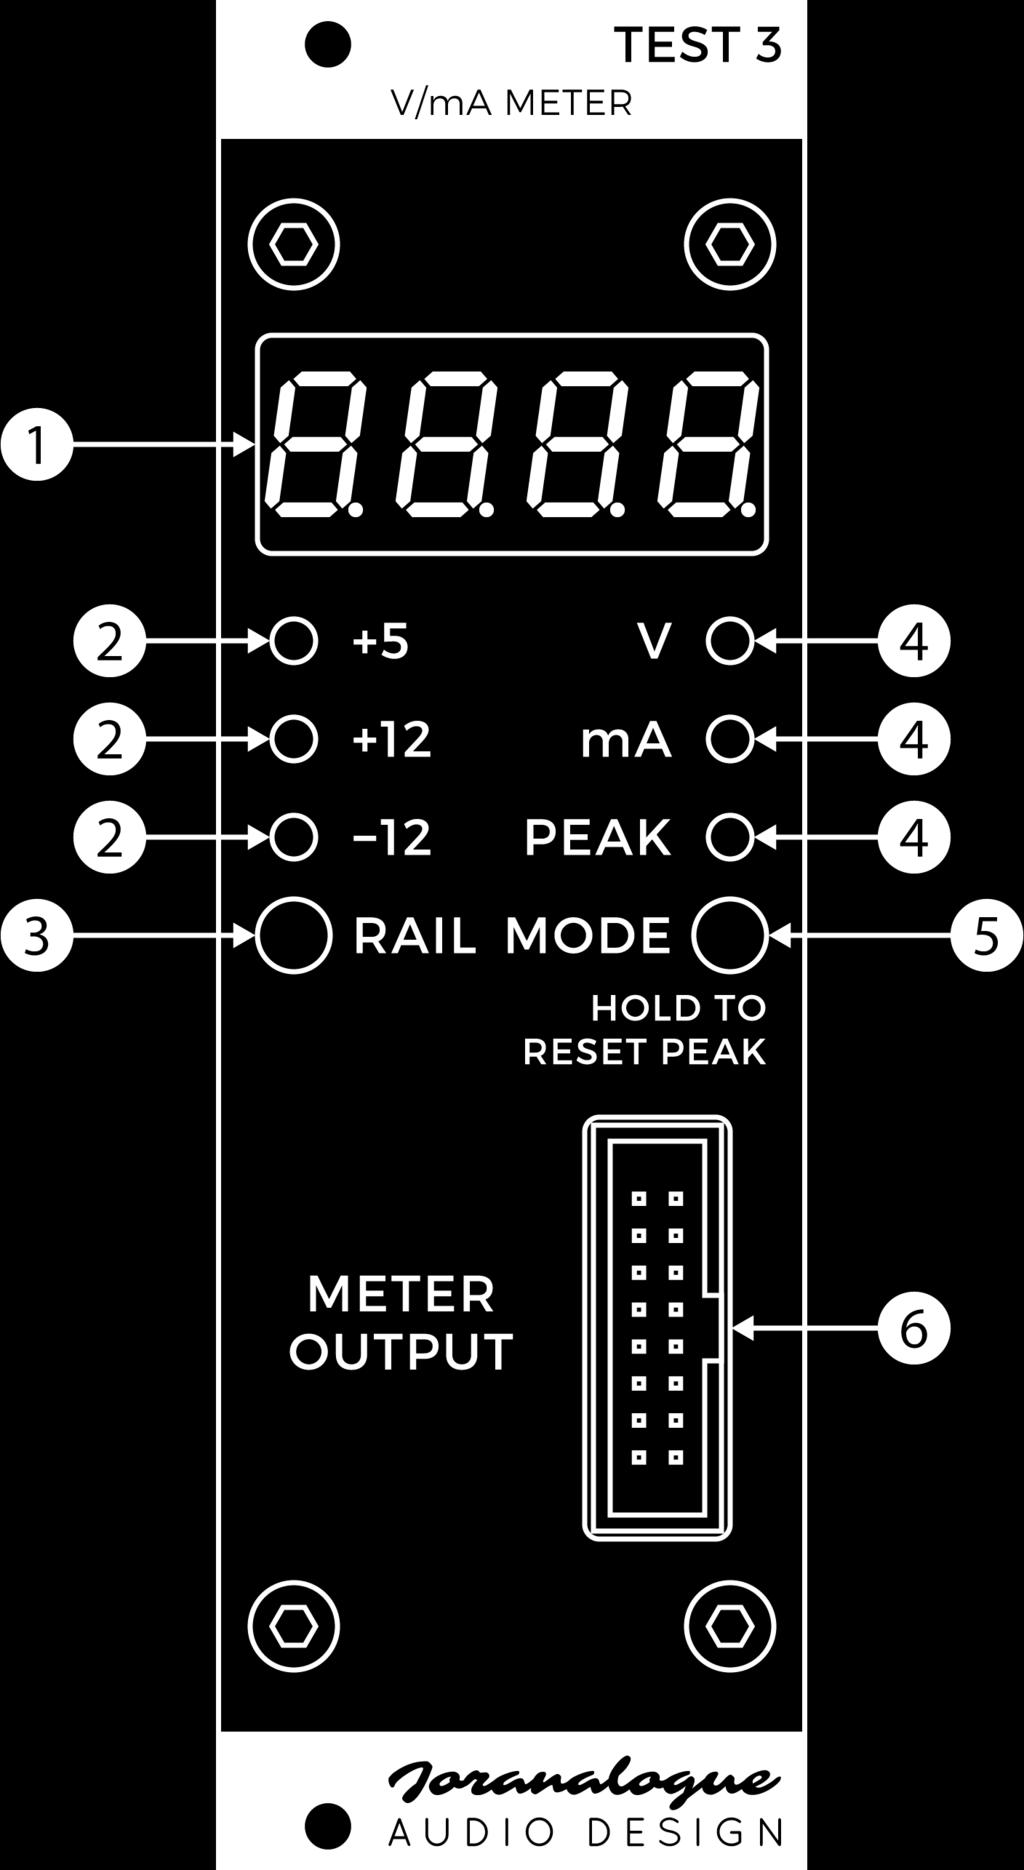 CONTROLS & CONNECTIONS 1 LED DISPLAY The selected measurement of the selected power rail is shown on the LED display.